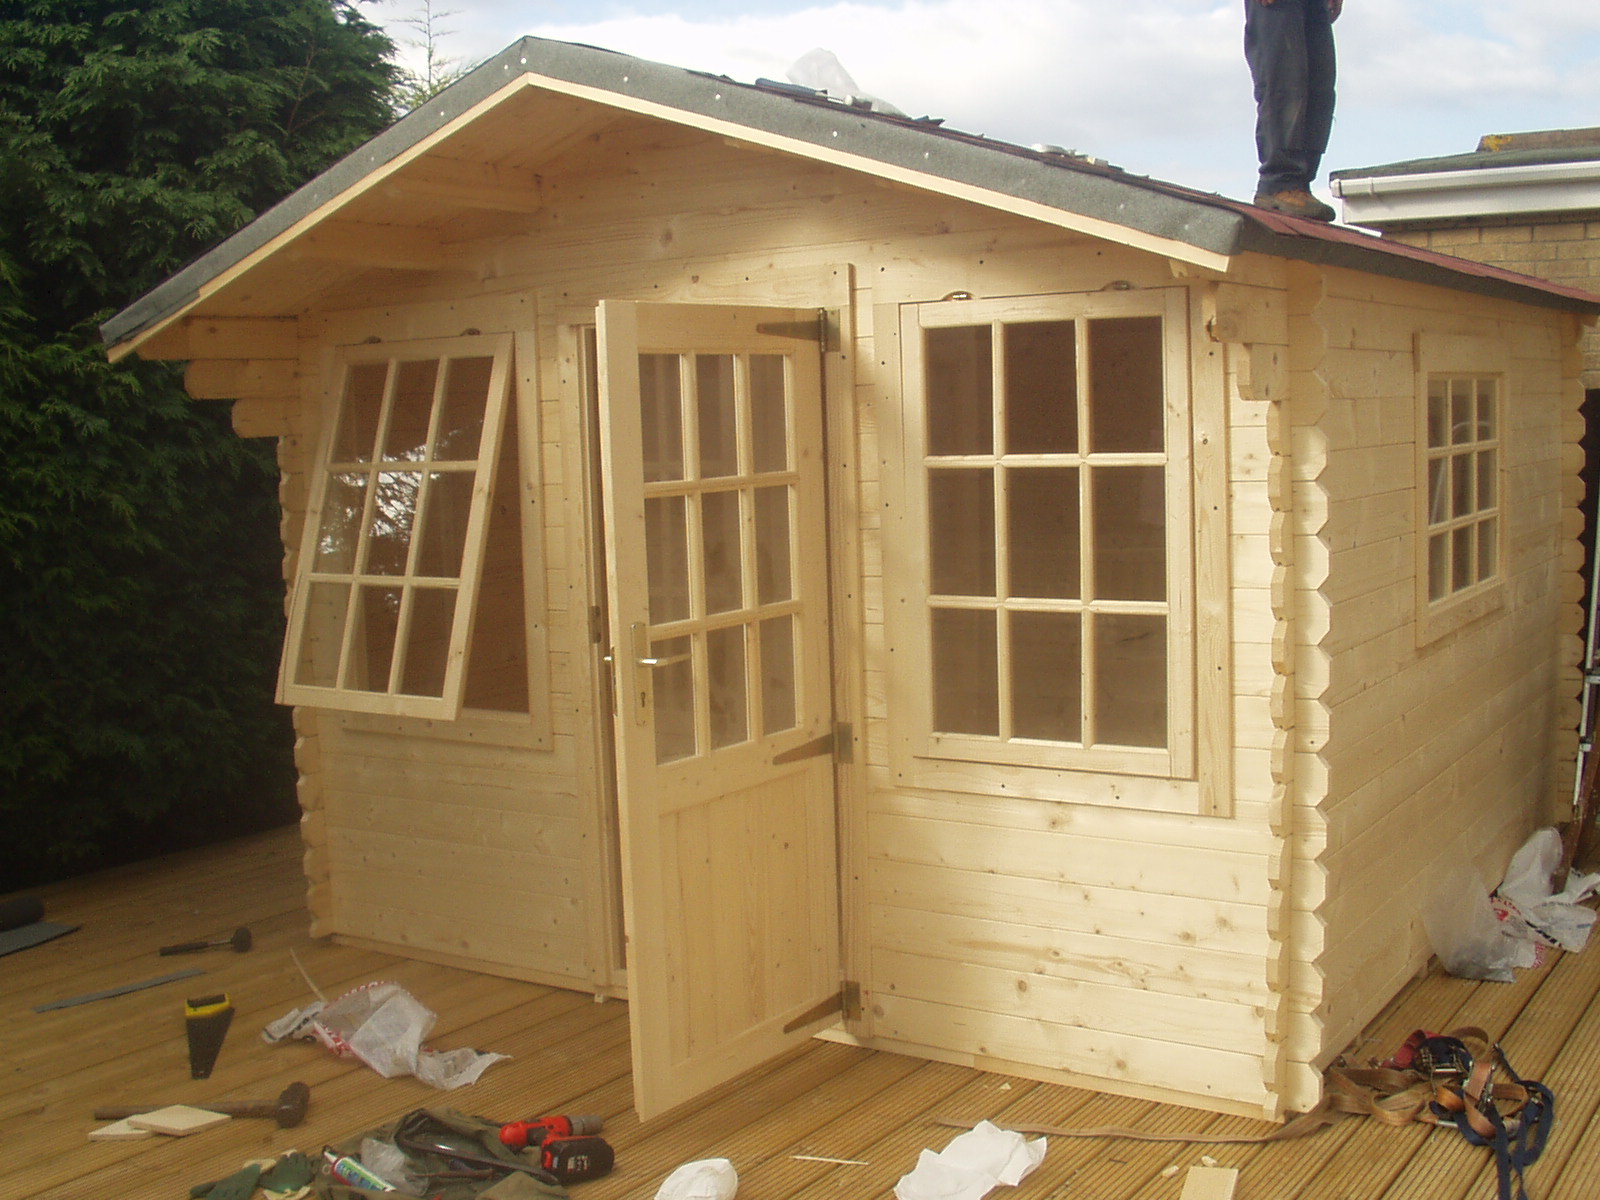 Build Sheds : My Shed Plans - Step-by-step Garden Sheds Shed Plans Kits